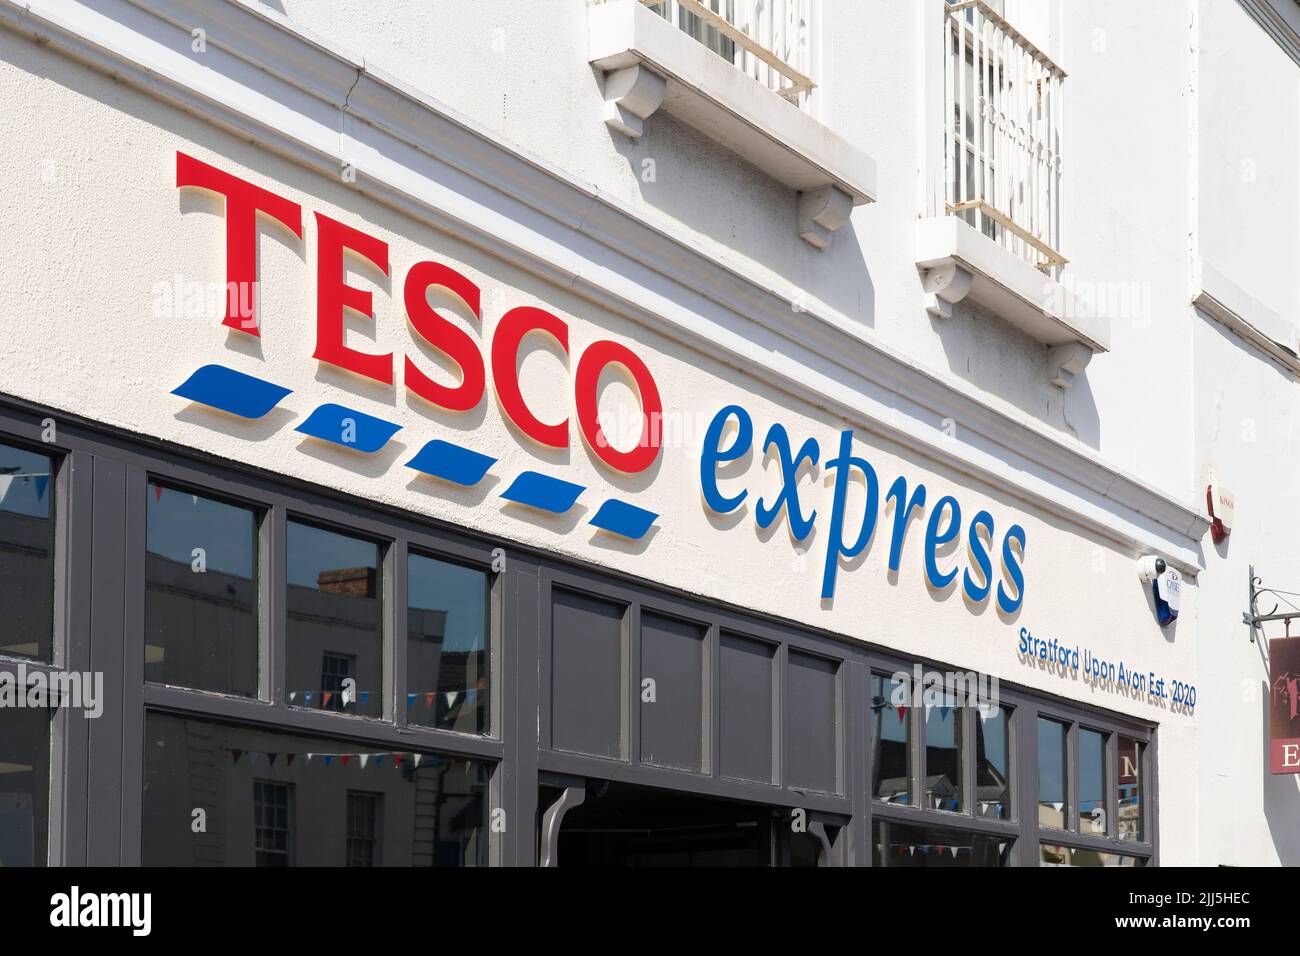 Tesco Express logo and title on a small supermarket on Bridge Street in Stratford upon Avon, England. Concept - cost of living Stock Photo